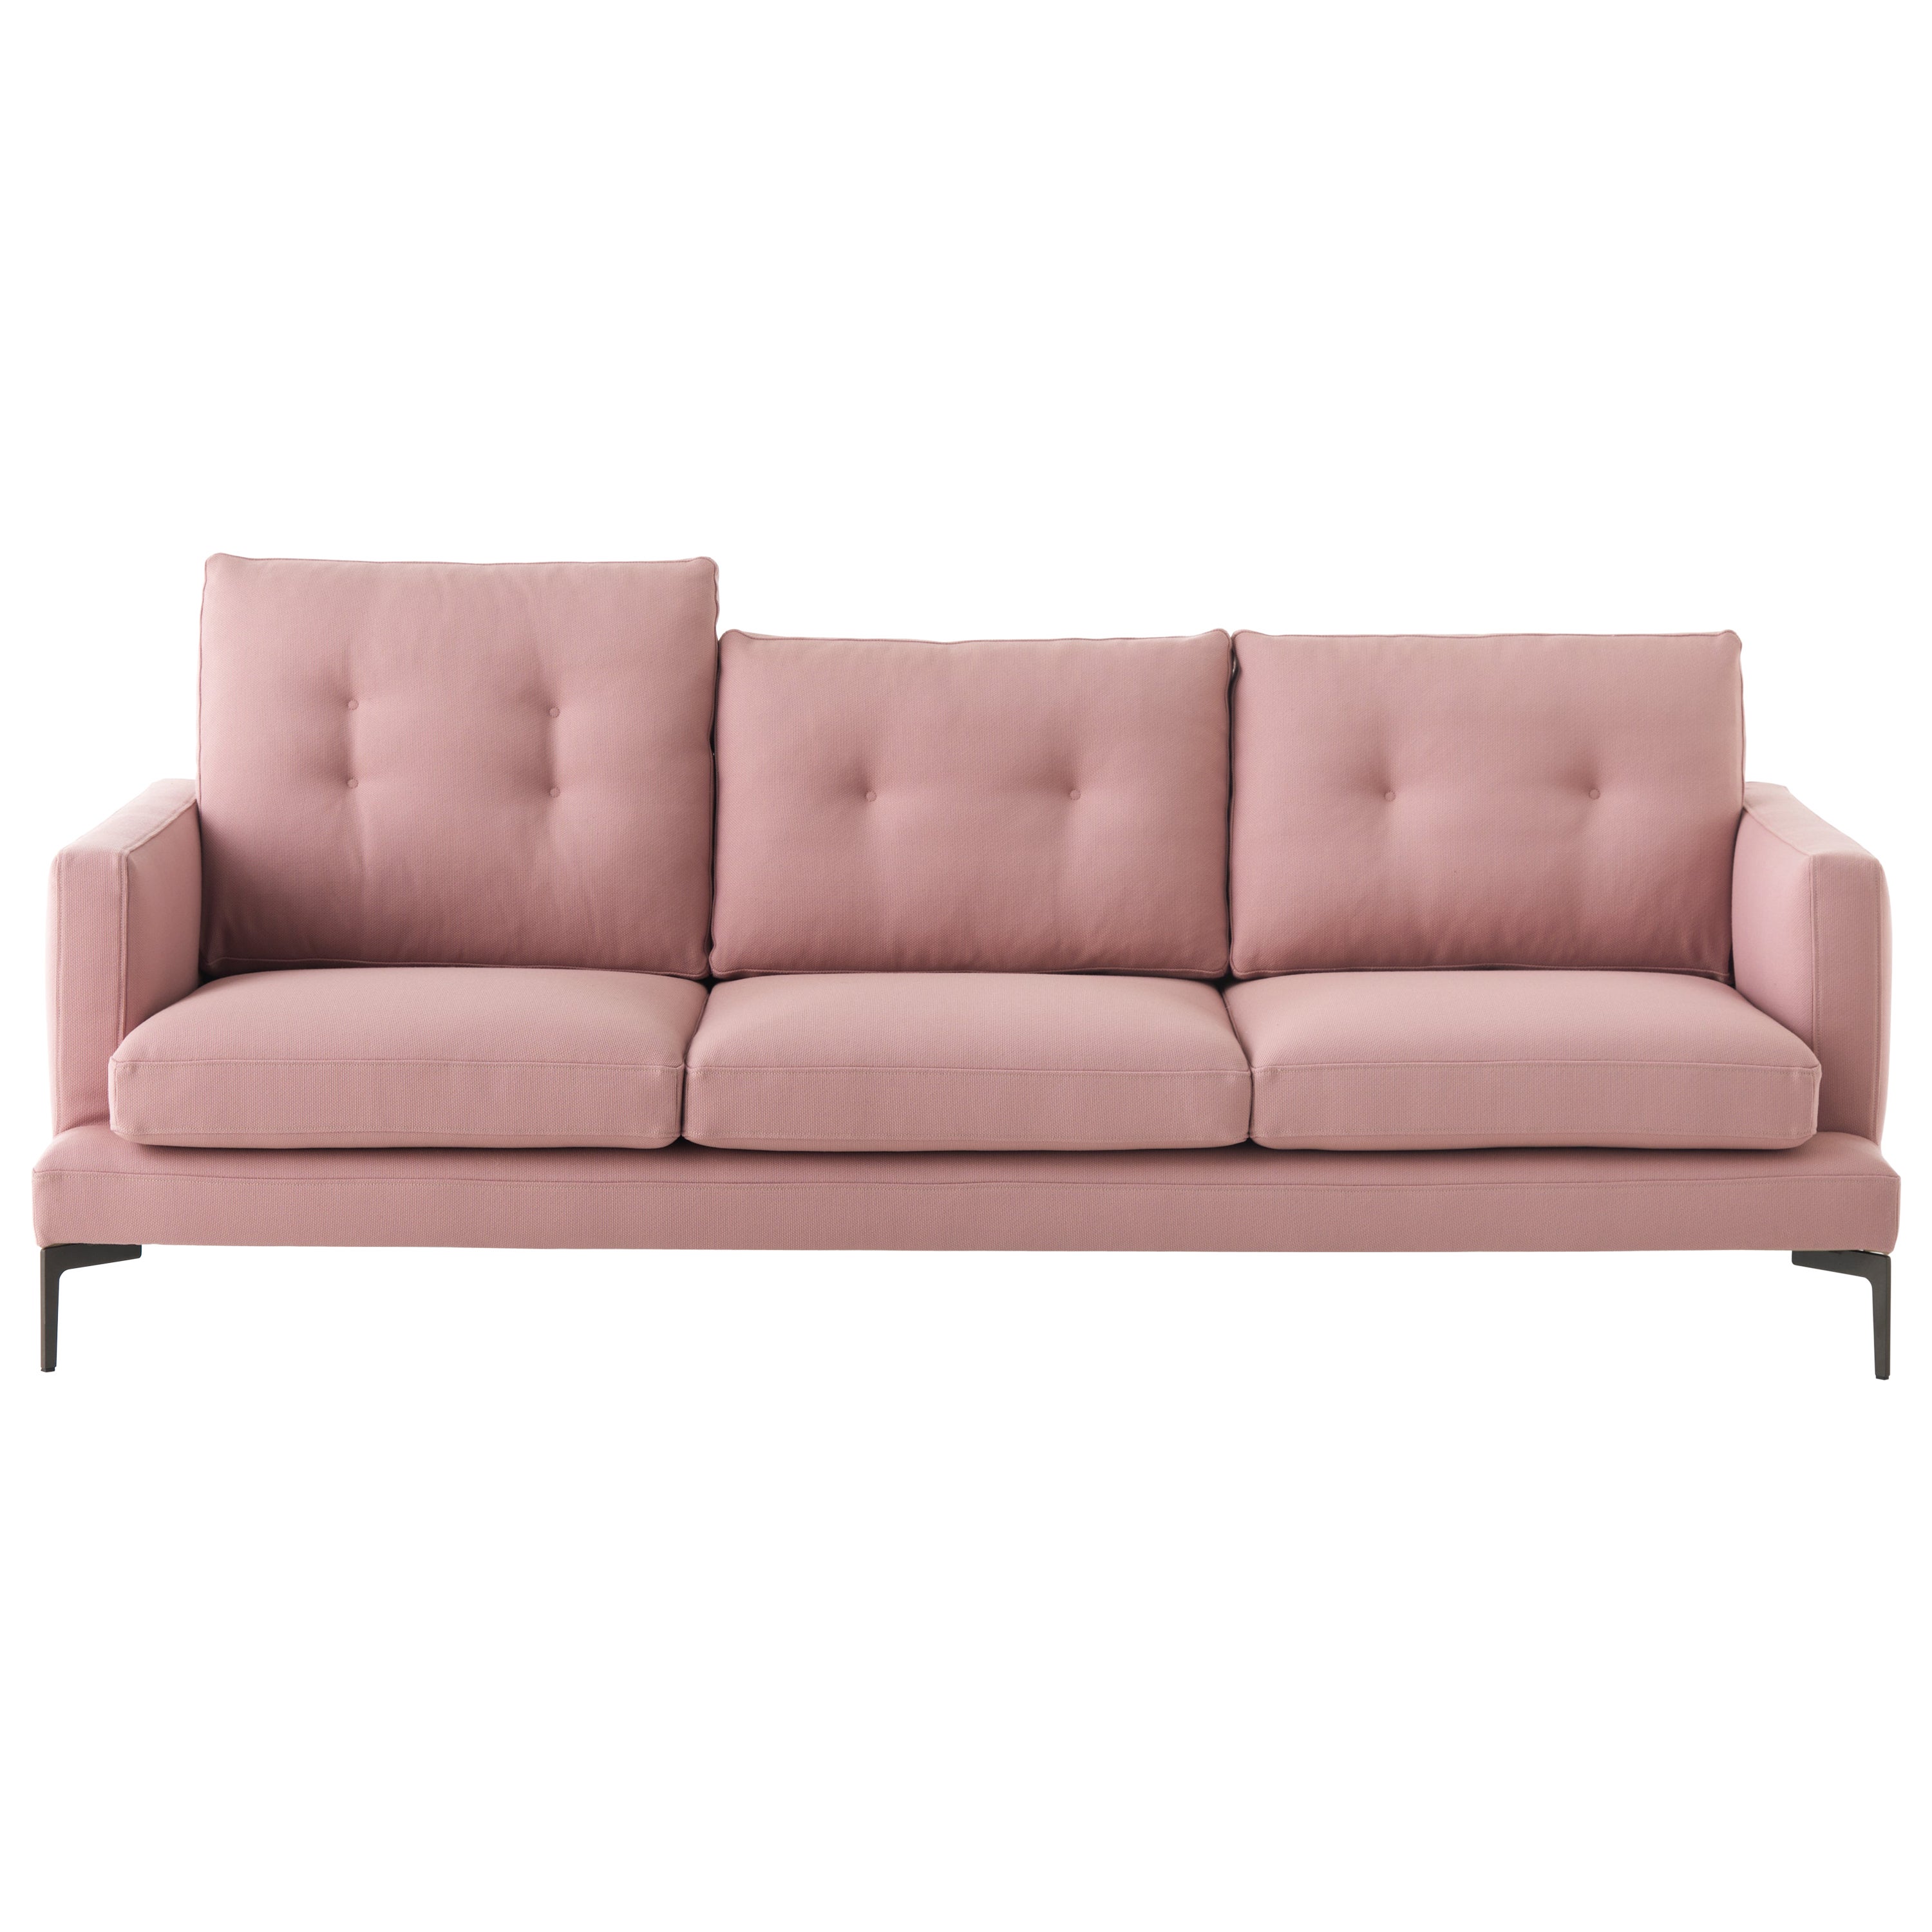 Essentiel 3-Seat 250 High Cushion Sofa in Smile Pink Upholstery by Sergio Bicego For Sale